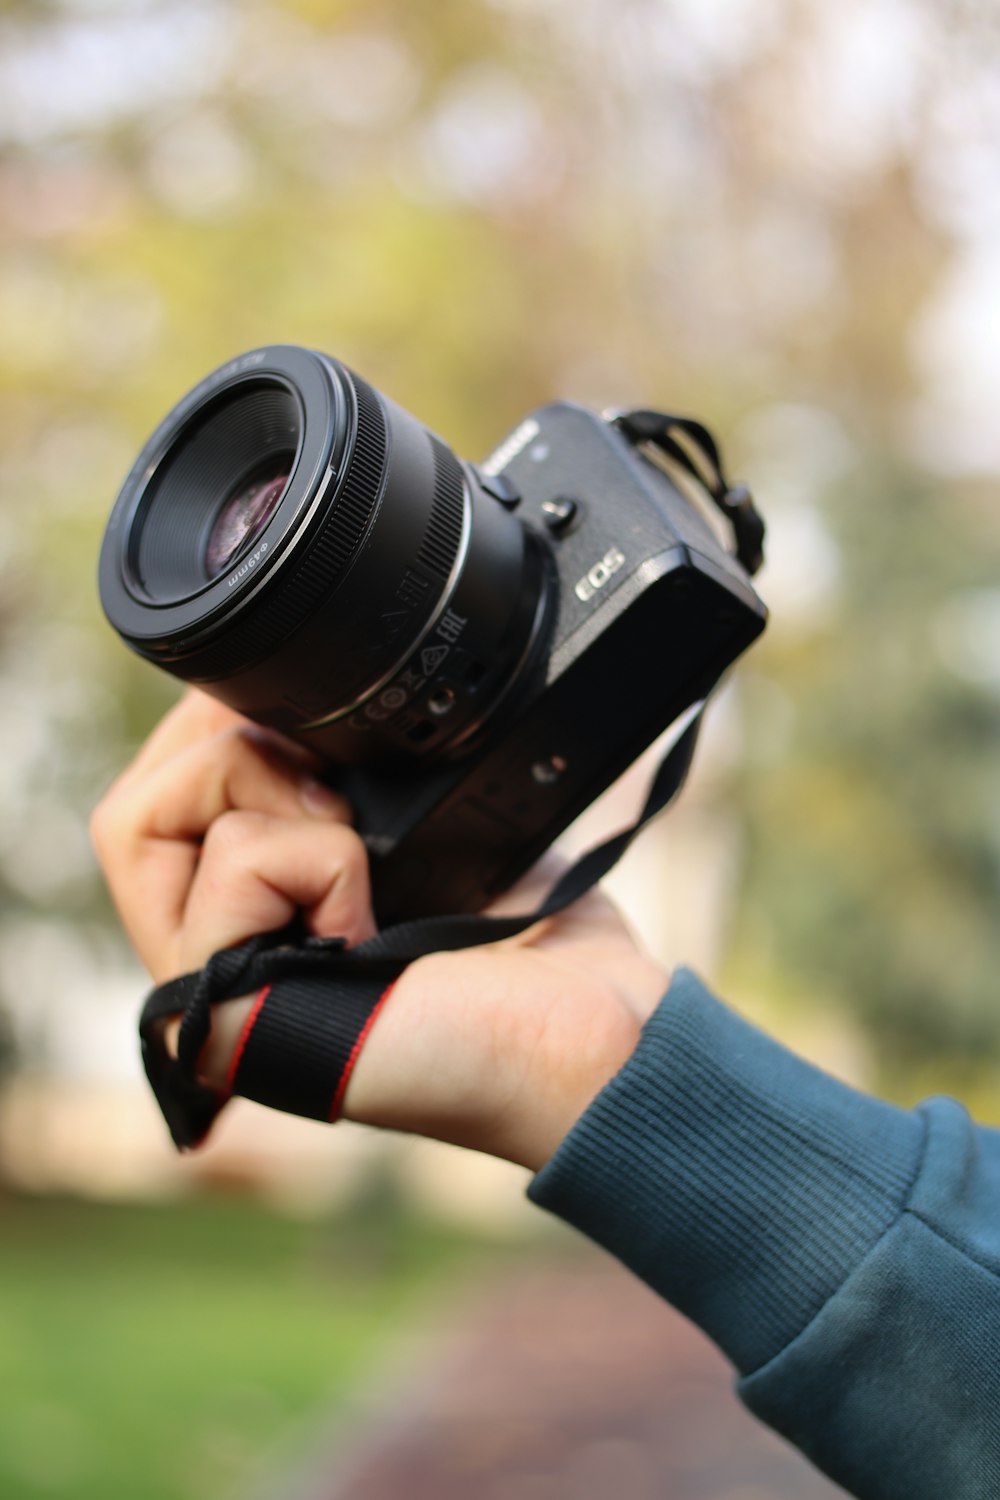 a person holding a camera in their hand